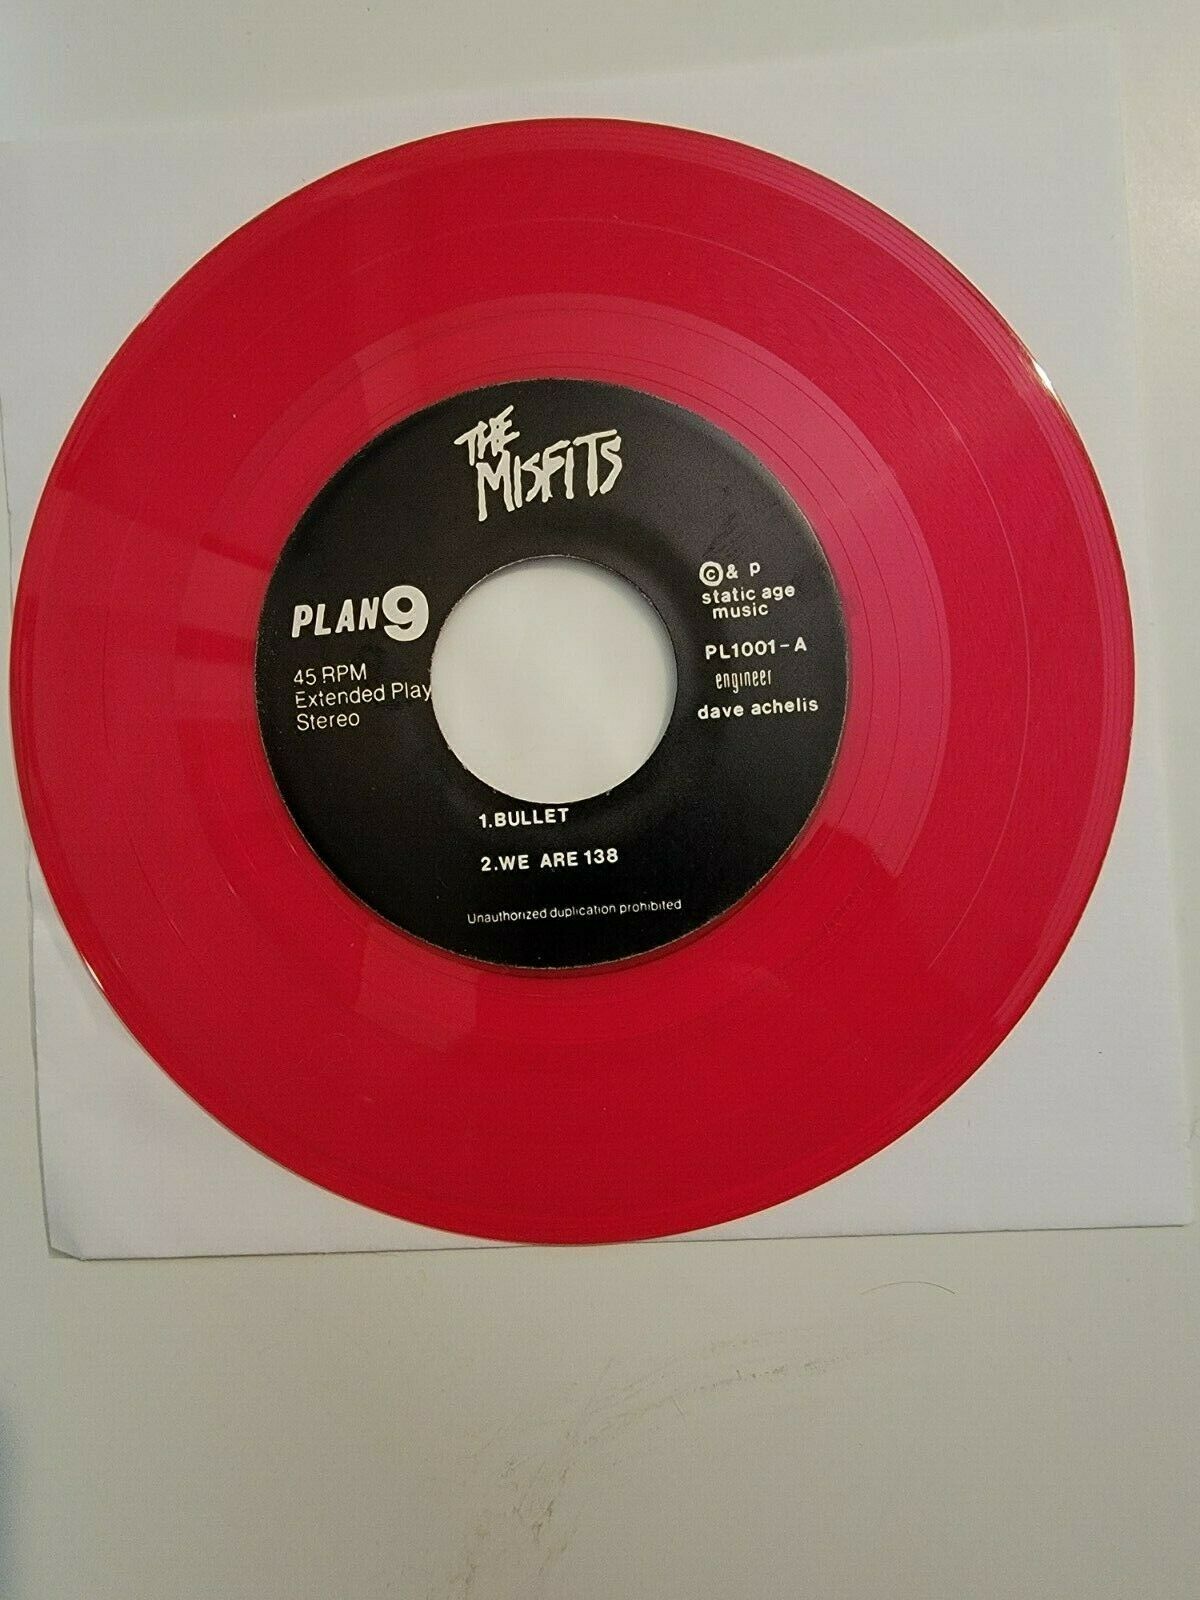 Pic 3 The Misfits - Bullet 7" Vinyl - Better Dead on Red - Press 1000 -Translucent Red